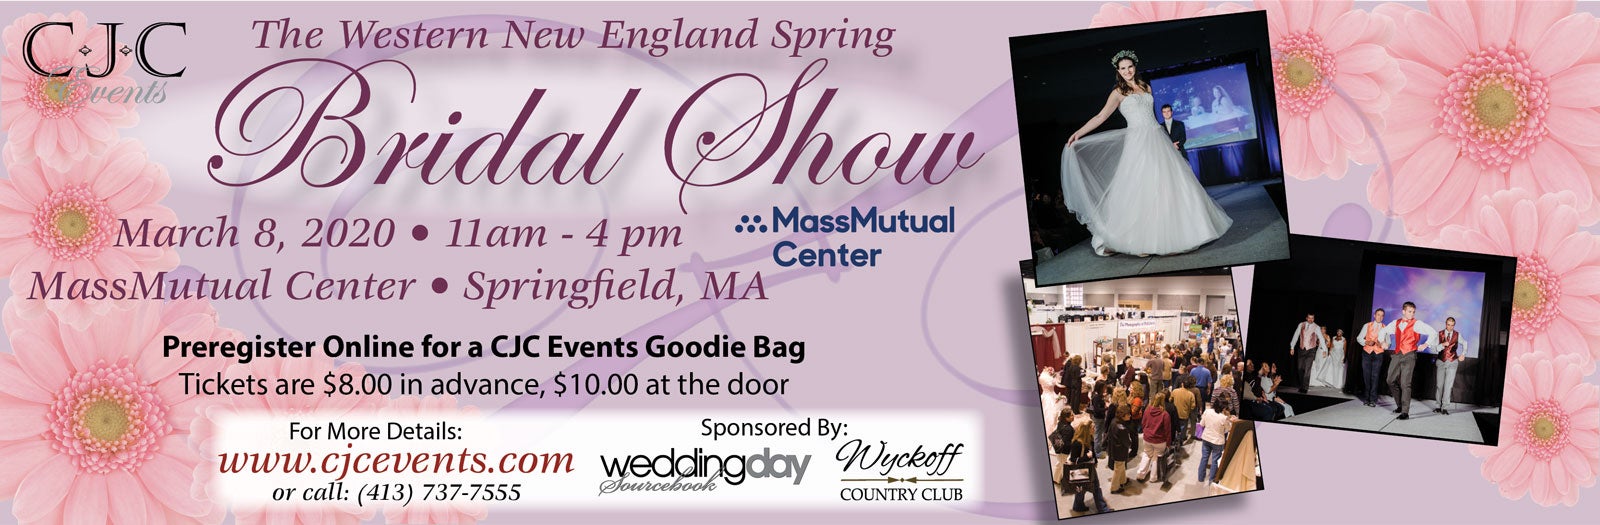 The Western New England Spring Bridal Show 2020